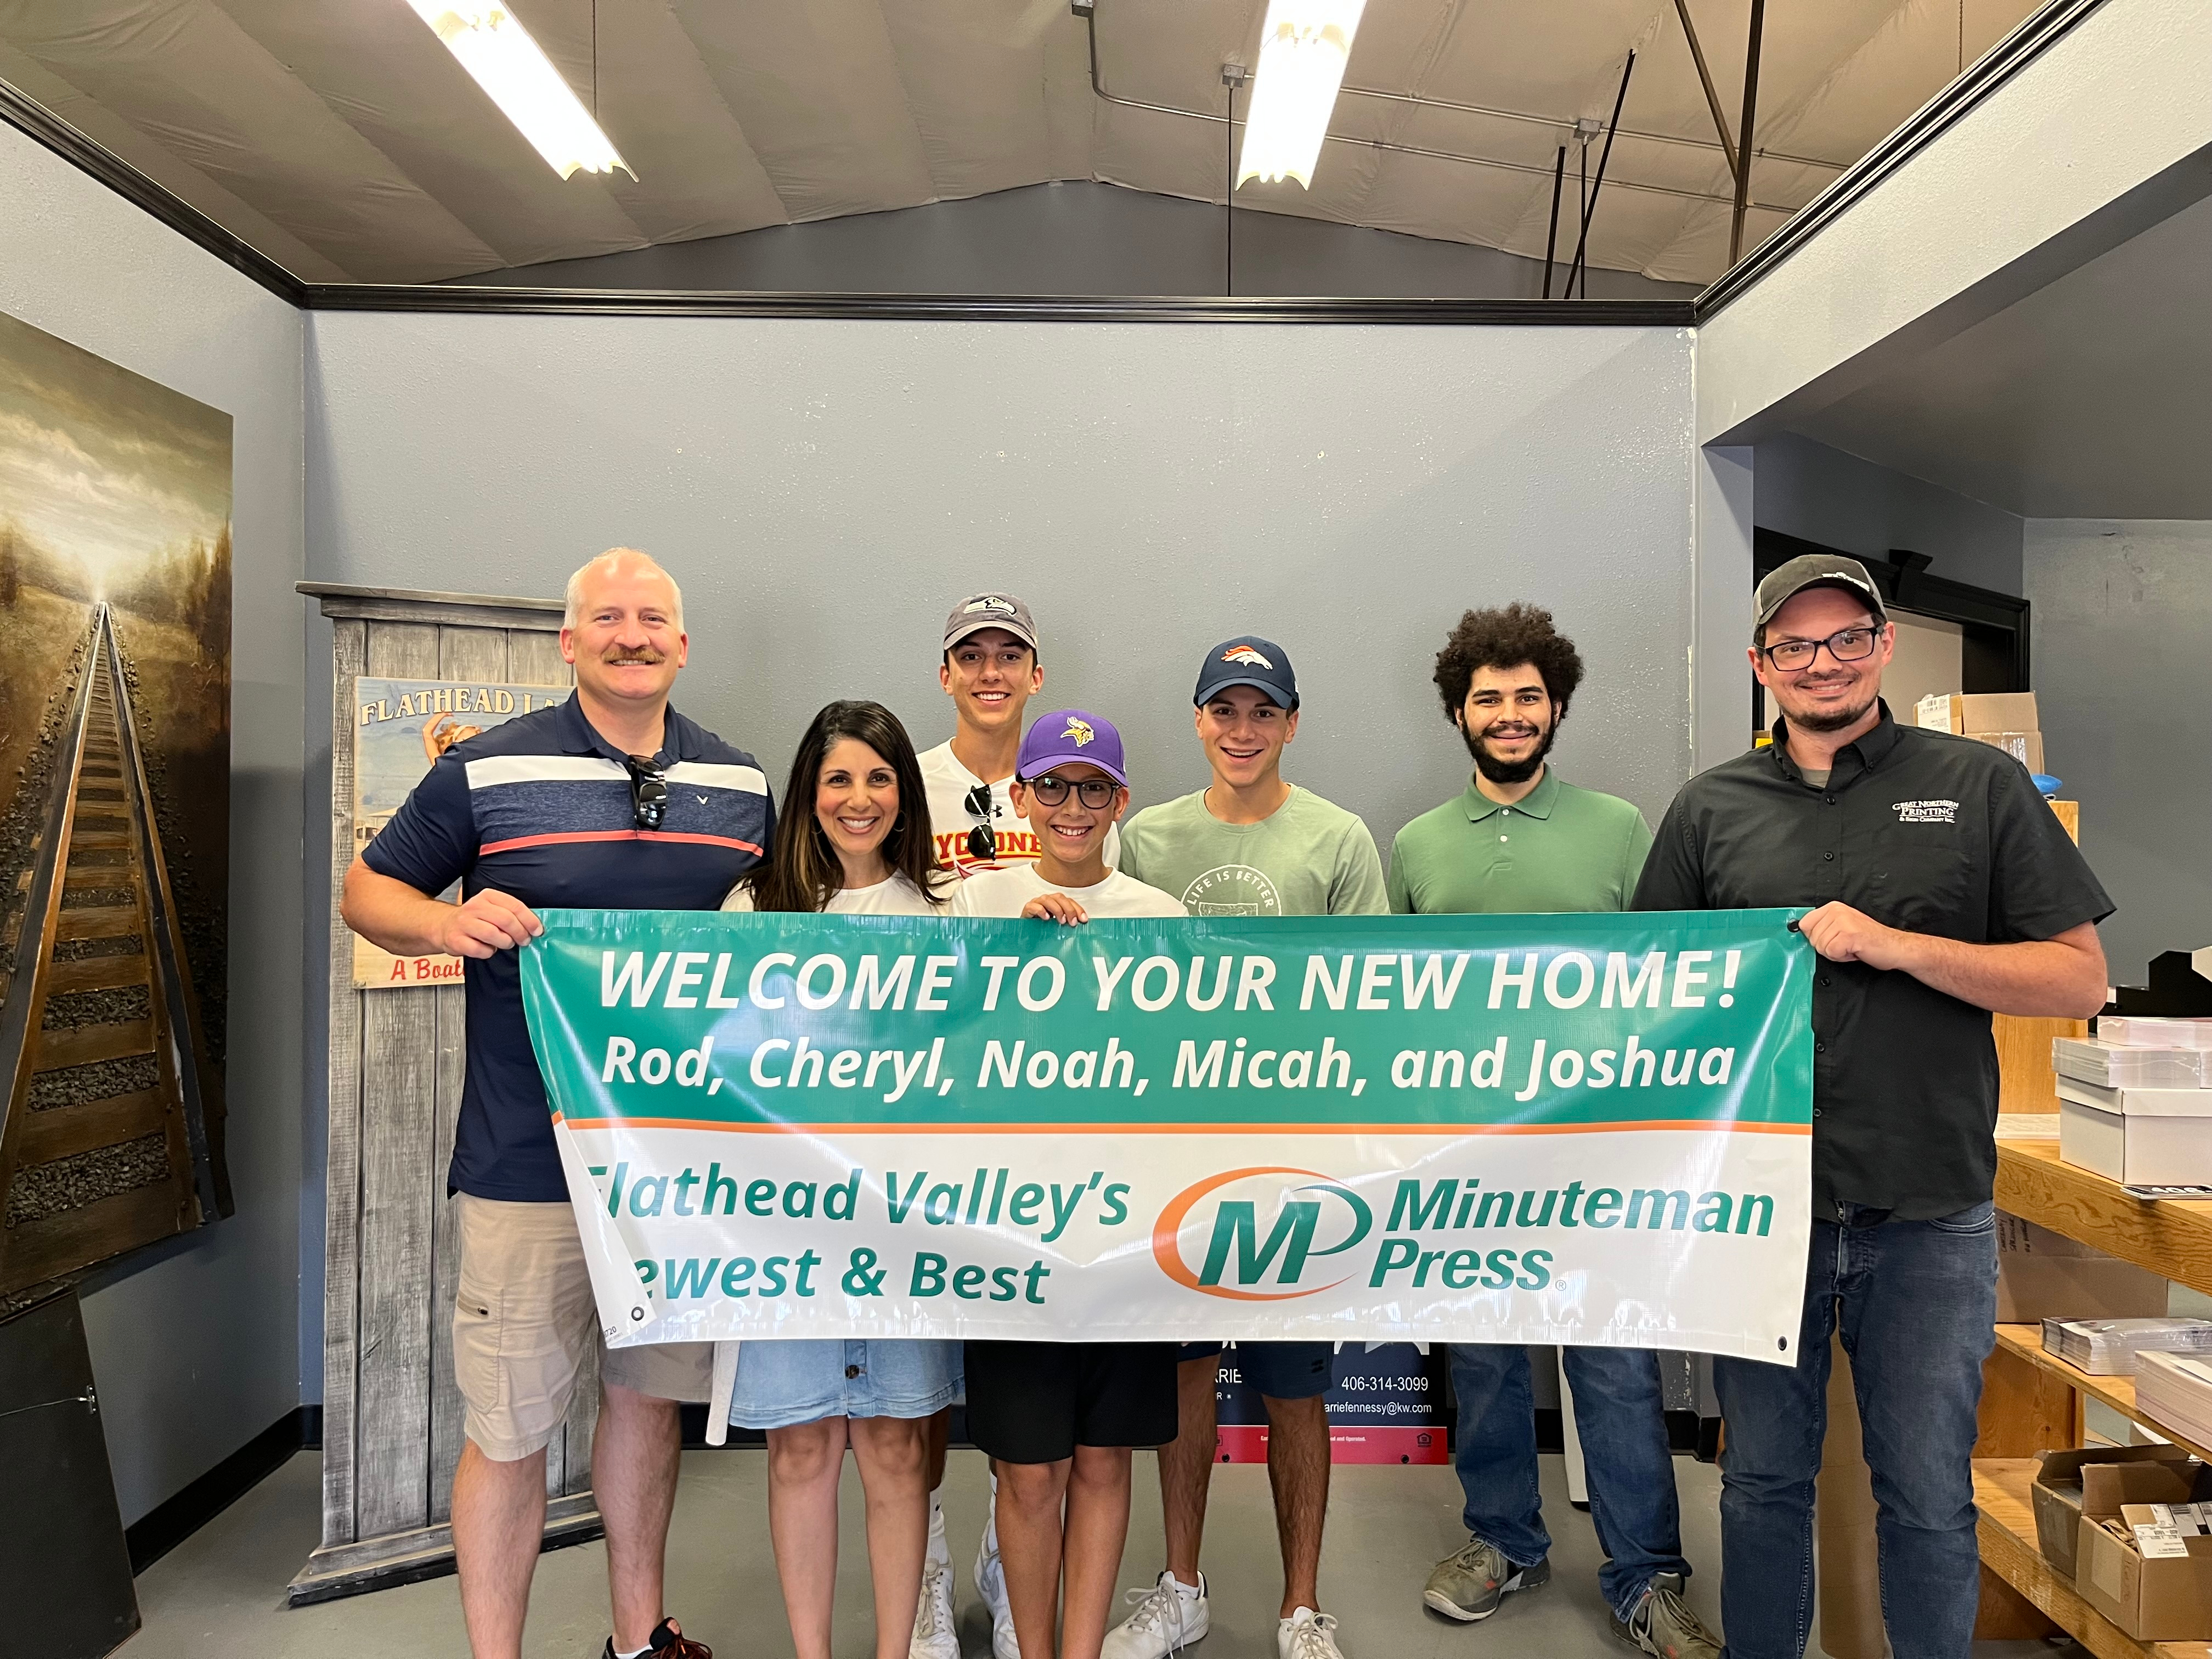 Minuteman Press, Flathead Valley, MT – Pictured left to right: Rod and Cheryl Klippenstein, owners; their sons Micah, Joshua, and Noah; and staff members Asa and David. https://sellyourprintingbusiness.com